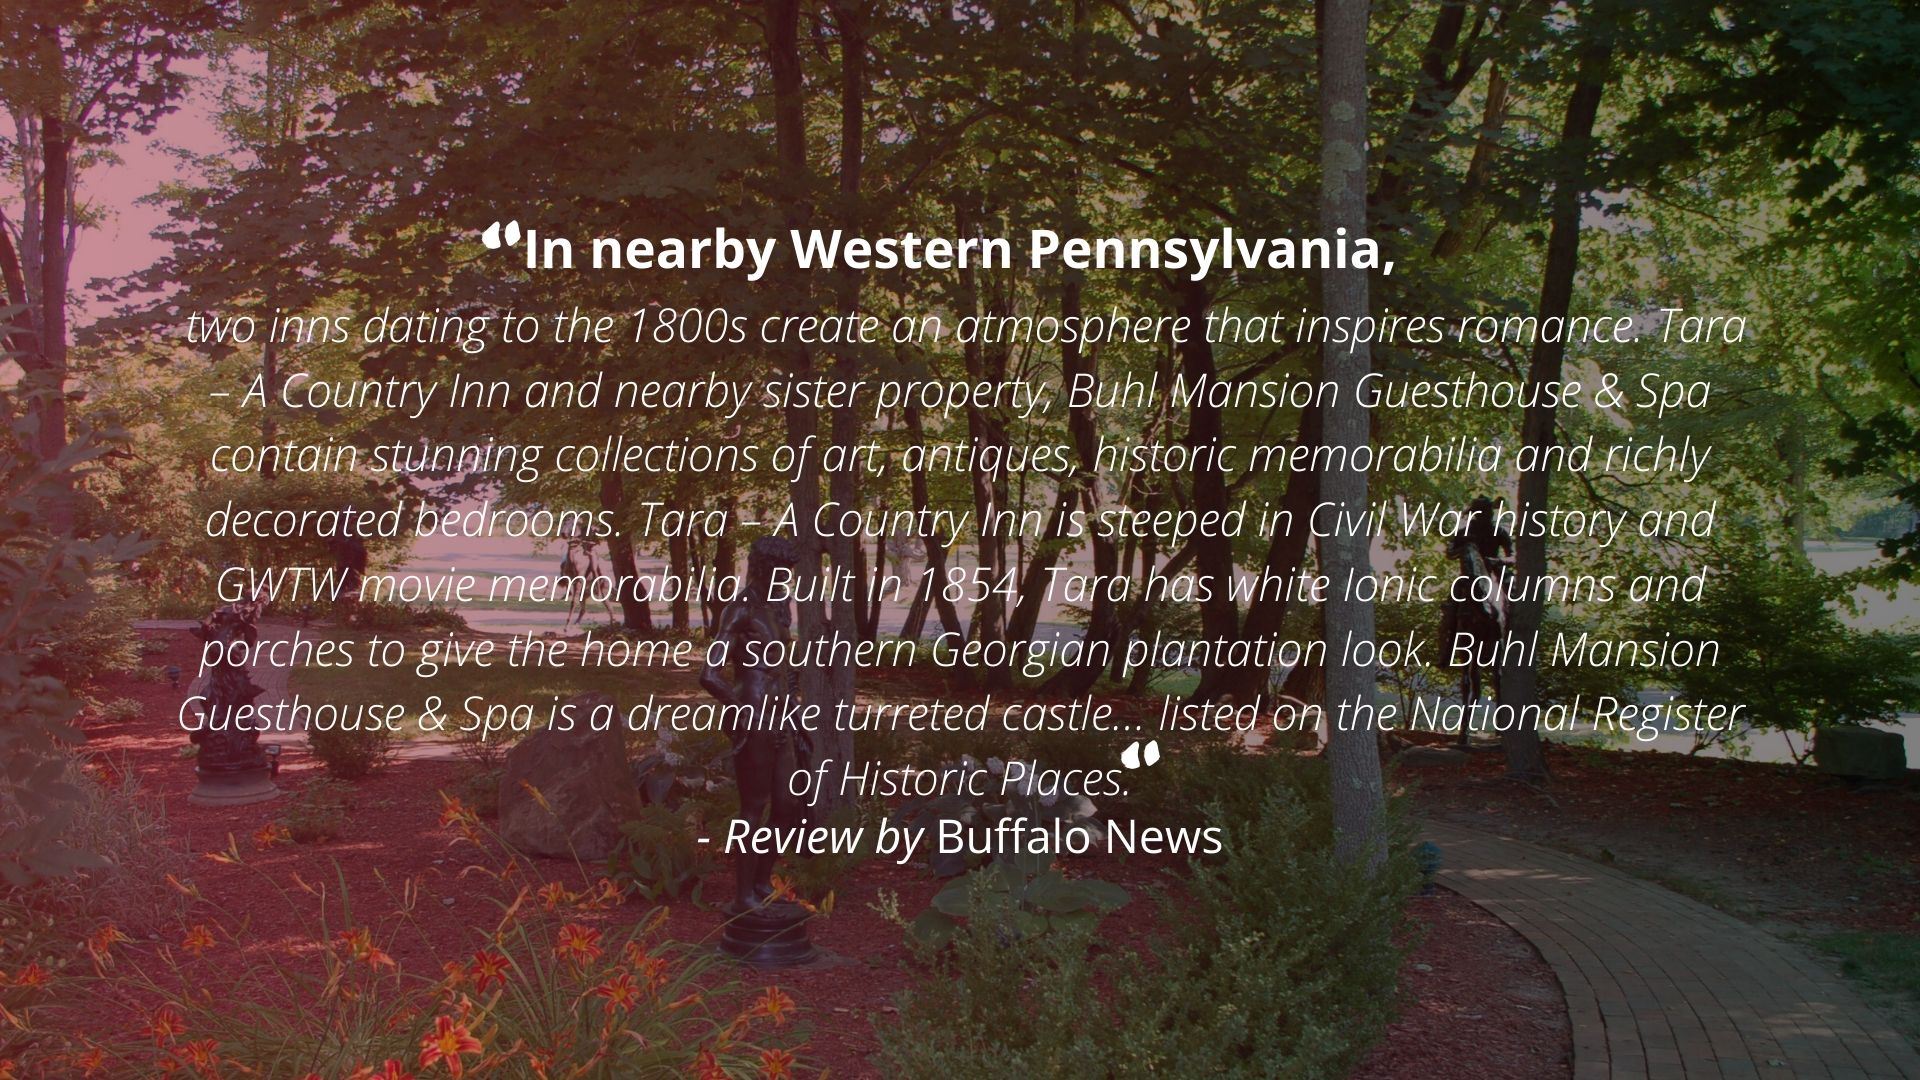 "In nearby Western Pennsylvania, two inns dating to the 1800s create an atmosphere that inspires romance. Tara - A Country Inn and nearby sister property, Buhl Mansion Guesthouse & Spa contain stunning collections of art, antiques, historic memorabilia and richly decorated bedrooms. Tara - A Country Inn is steeped in Civil War history and GWTW movie memorabilia. Built in 1854, Tara has white Ionic columns and porches to give the home a southern Georgian plantation look. Buhl Mansion Guesthouse & Spa is a dreamlike turreted castle... listed on the National Register of Historic Places." - Review by Buffalo News